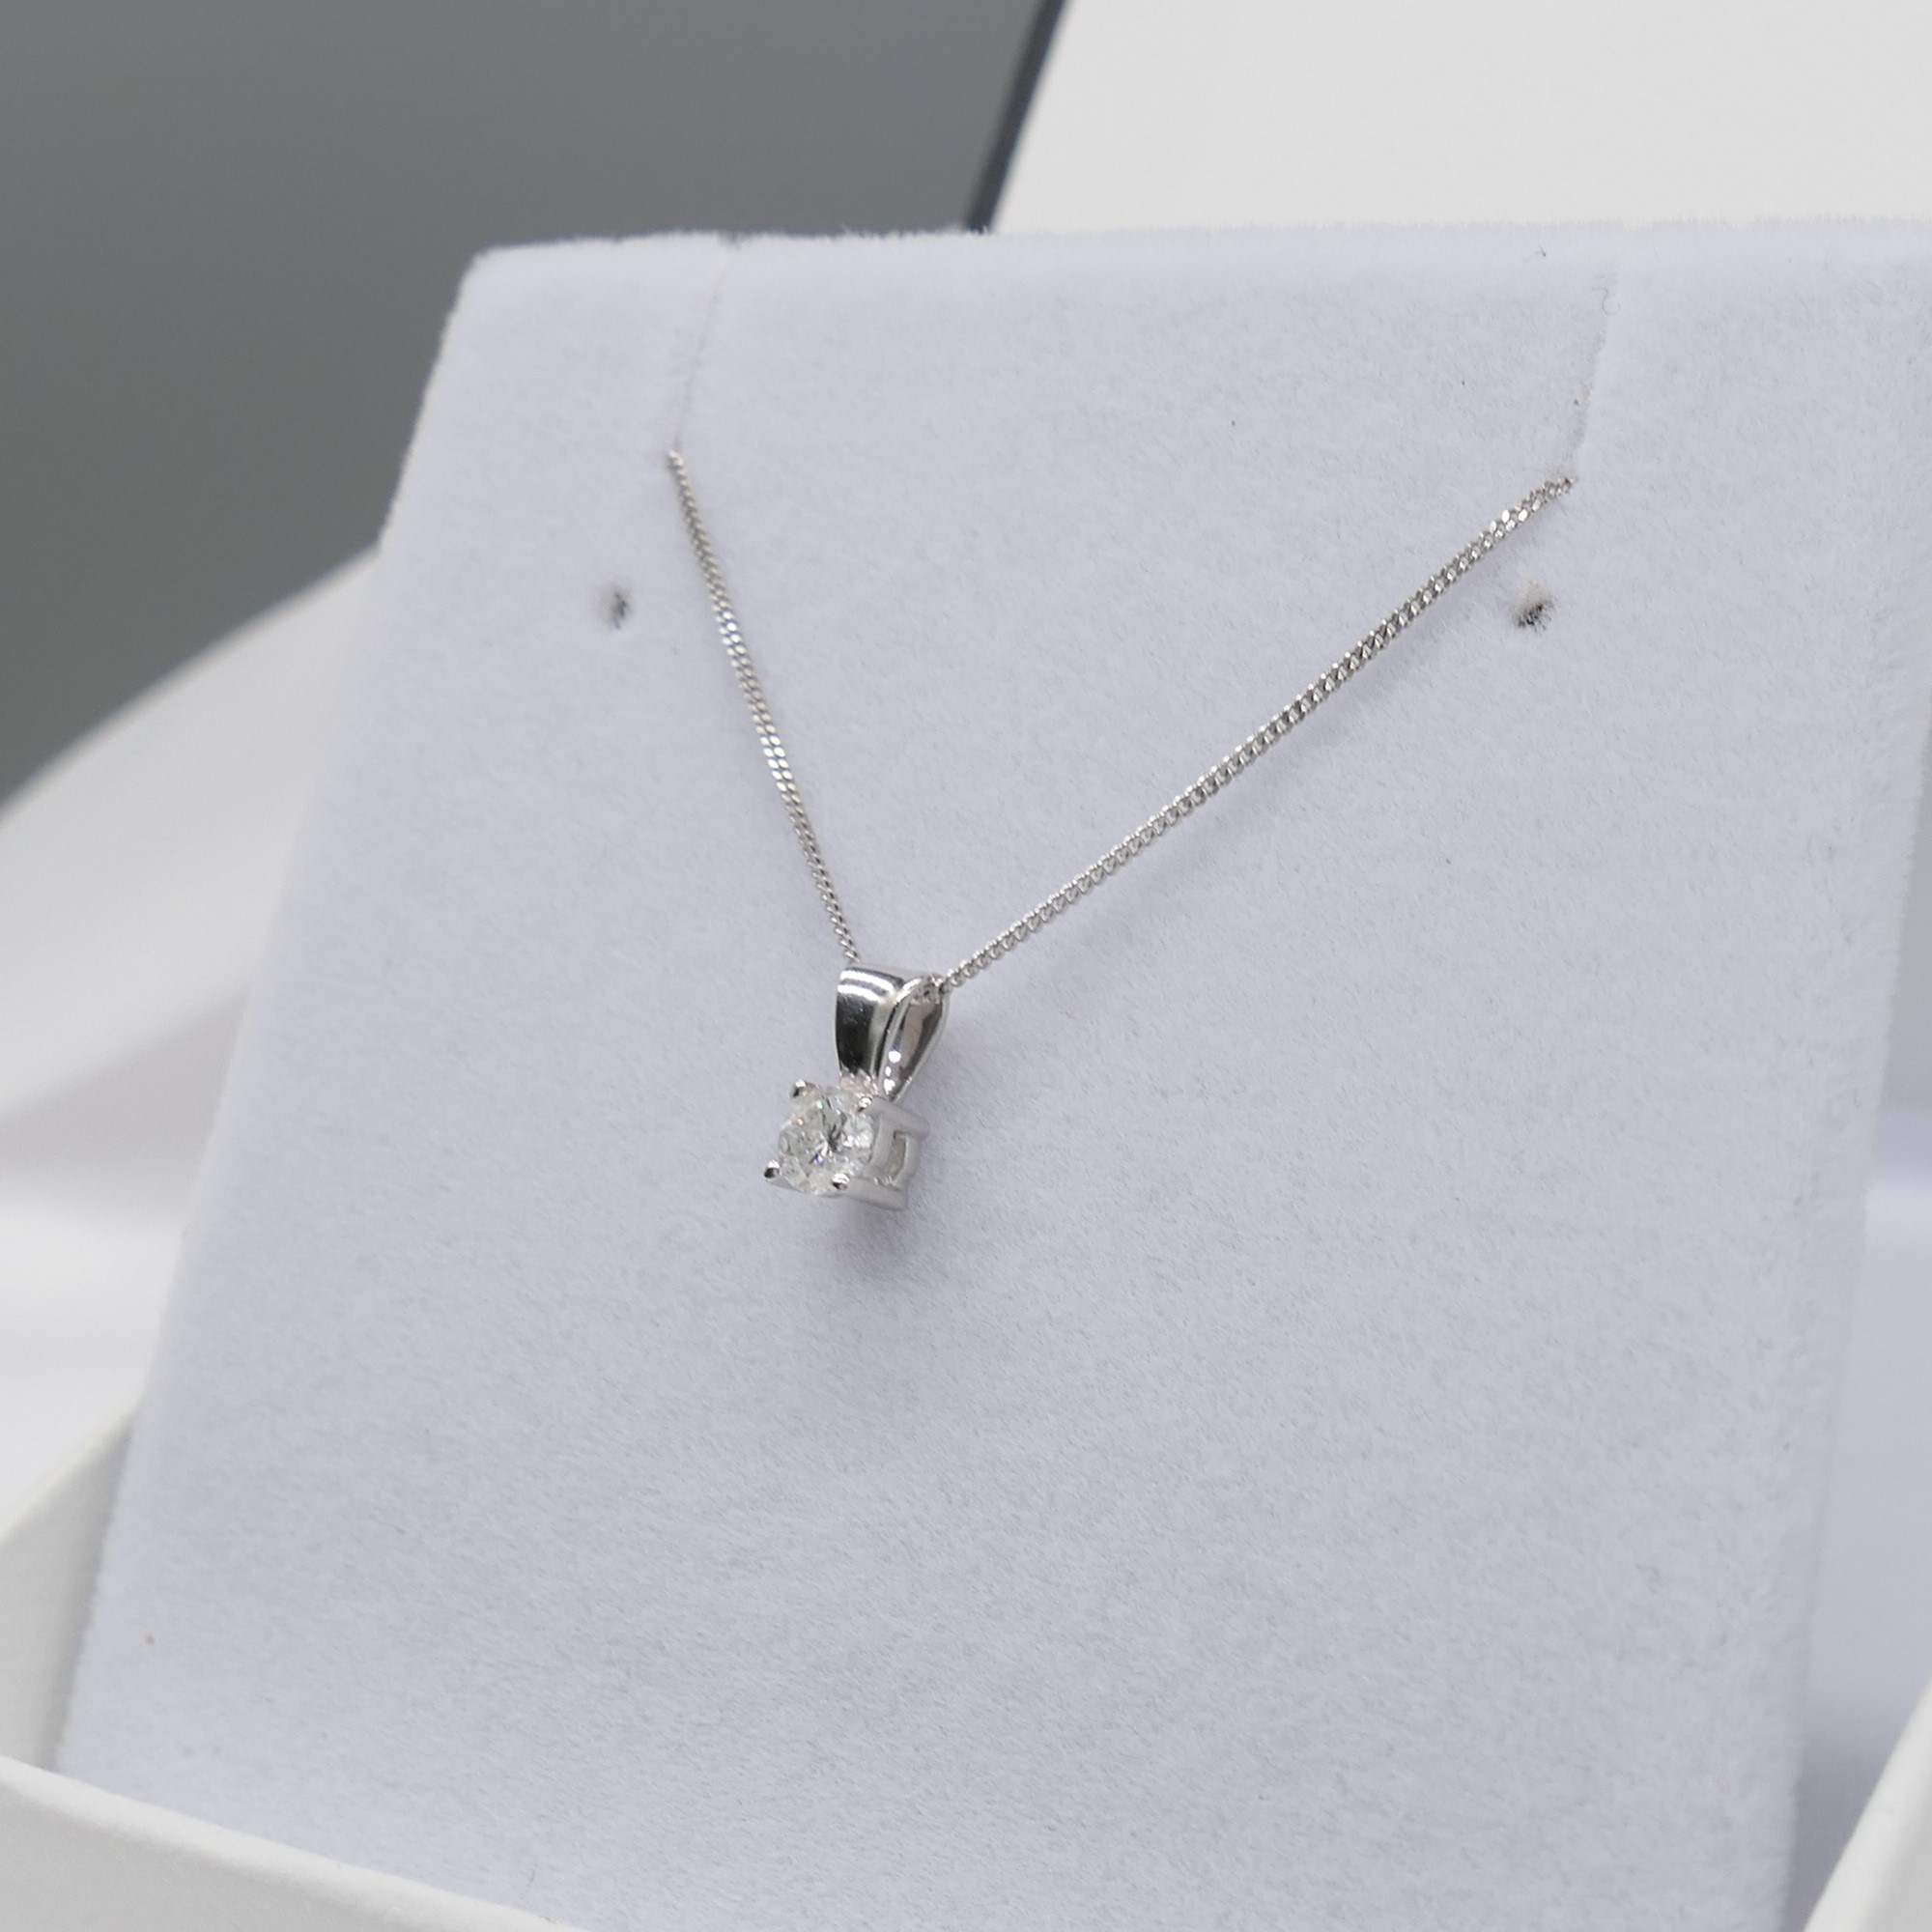 0.15 Carat Diamond Solitaire Necklace In White Gold, With Magnetic Gifting Box - Image 6 of 8